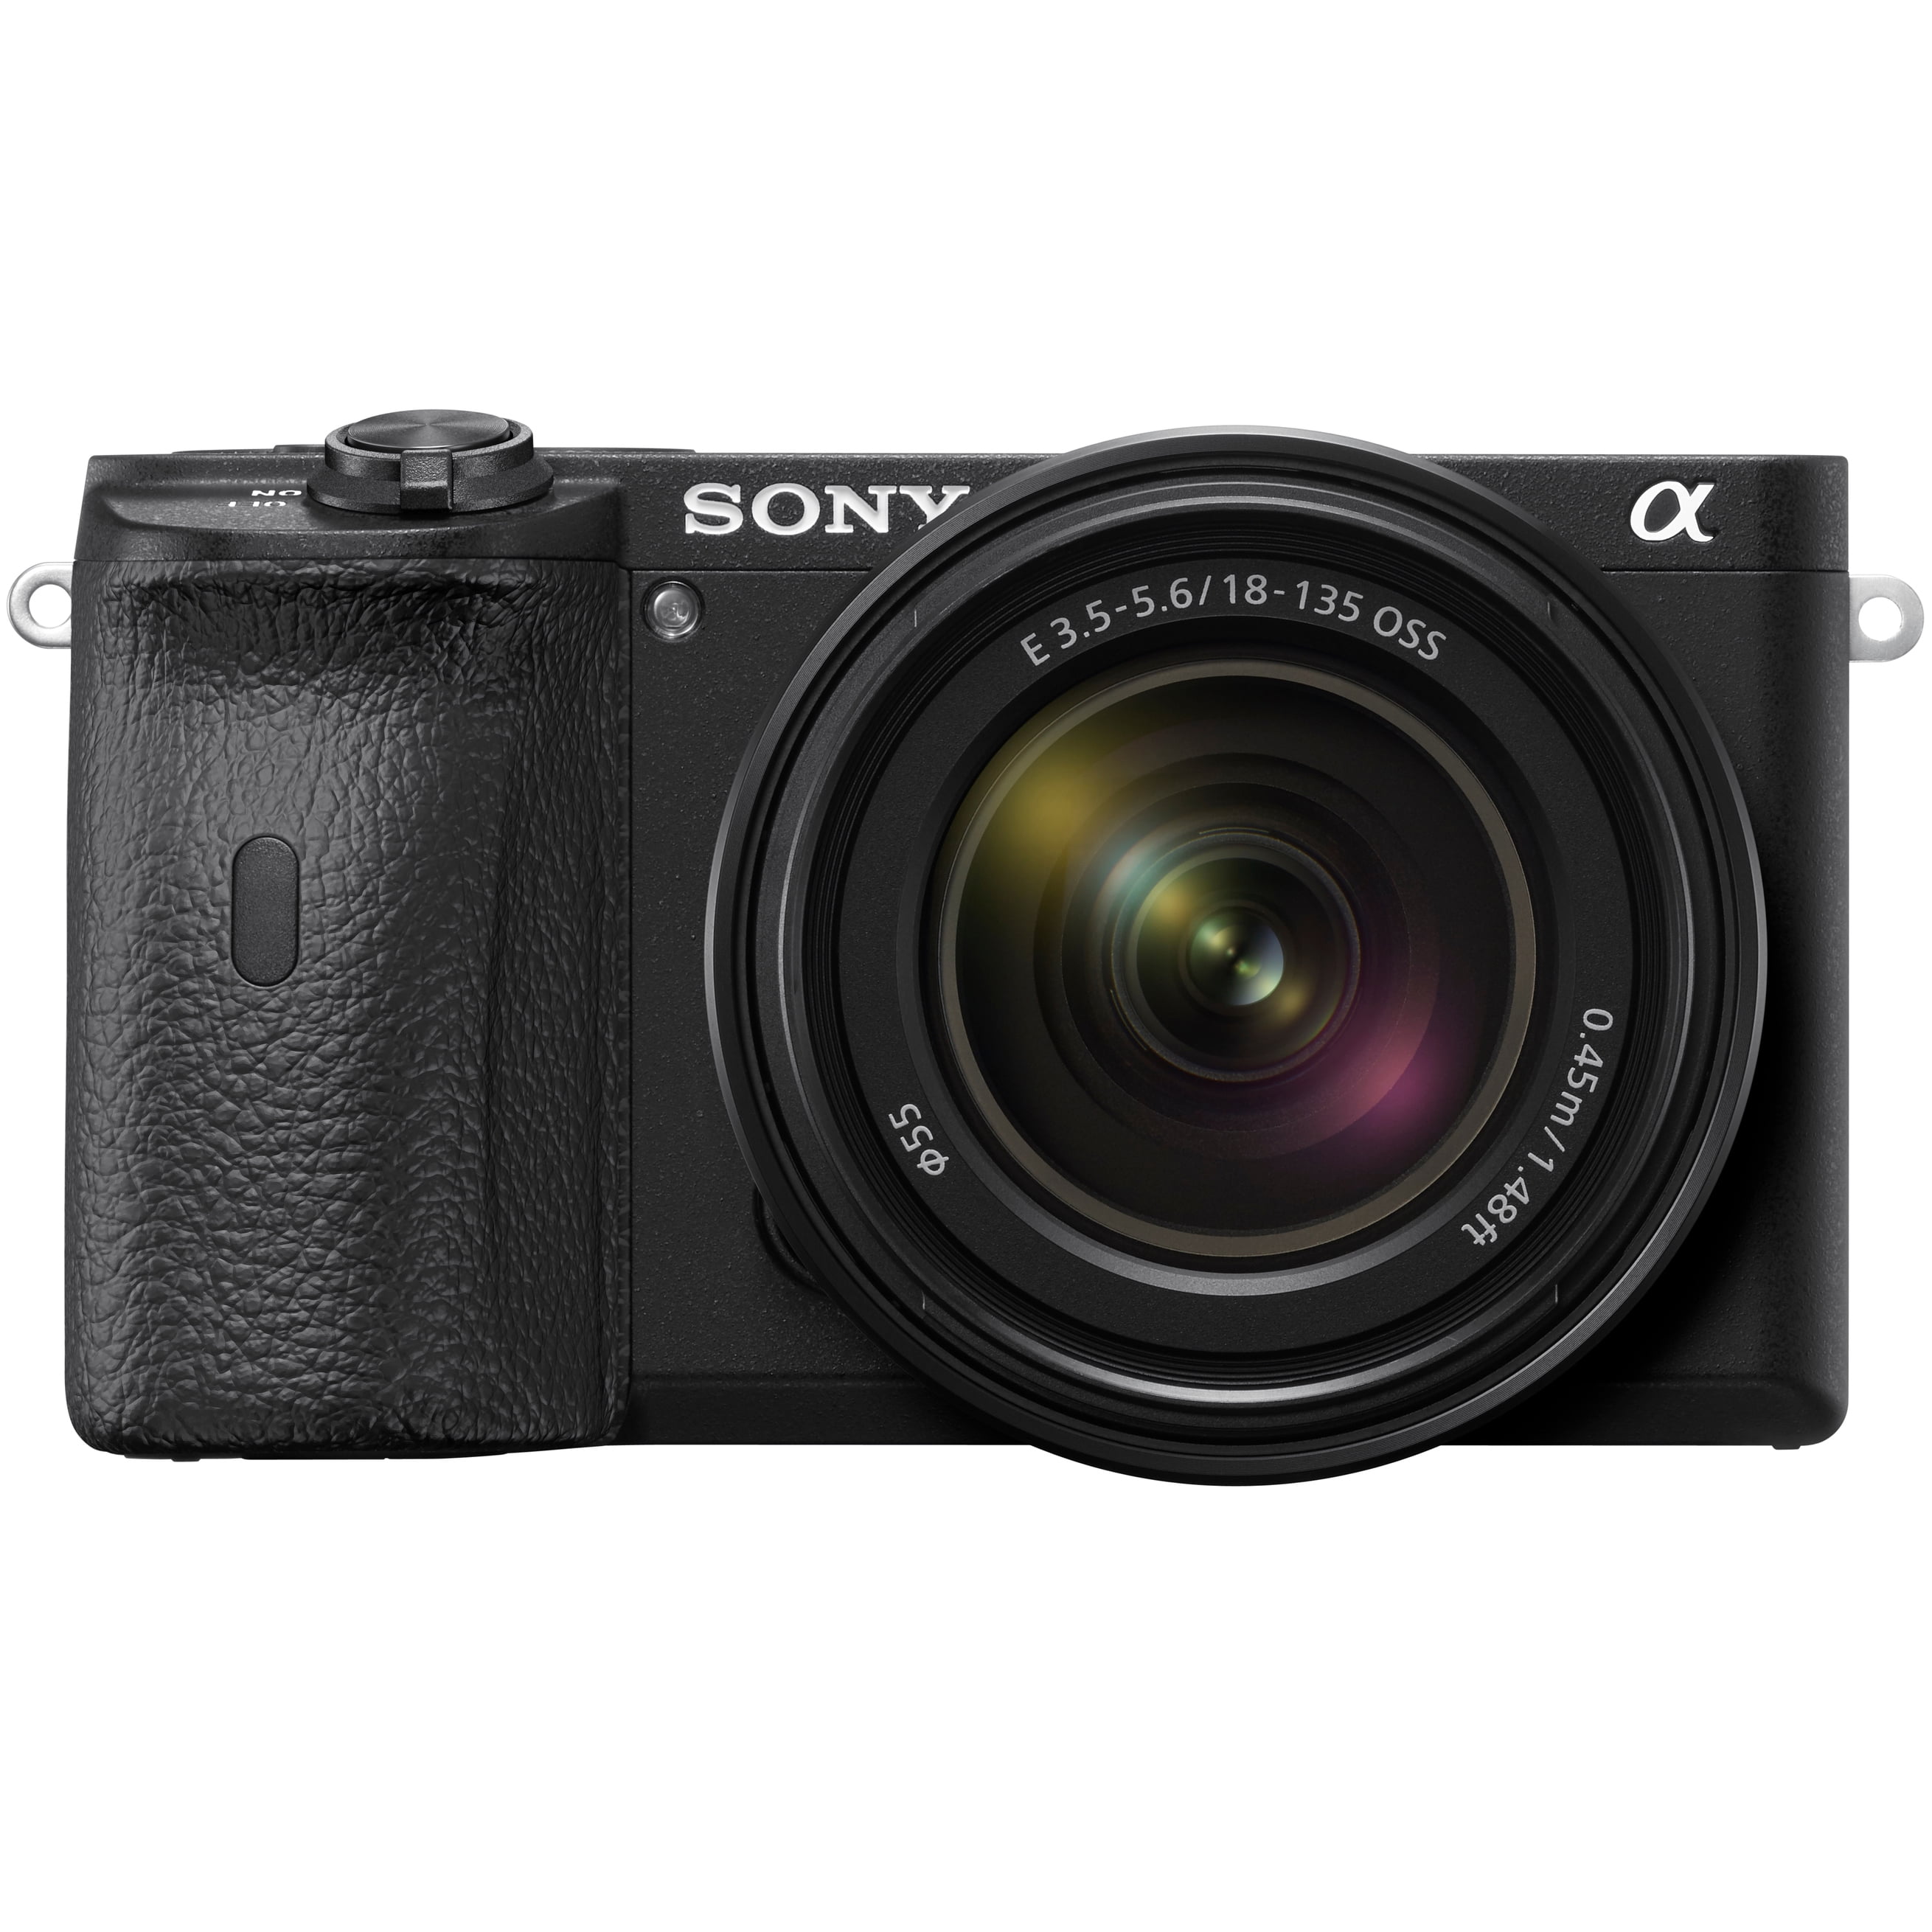 Sony Alpha a6600 24.2 Megapixel Mirrorless Camera with Lens, 0.71